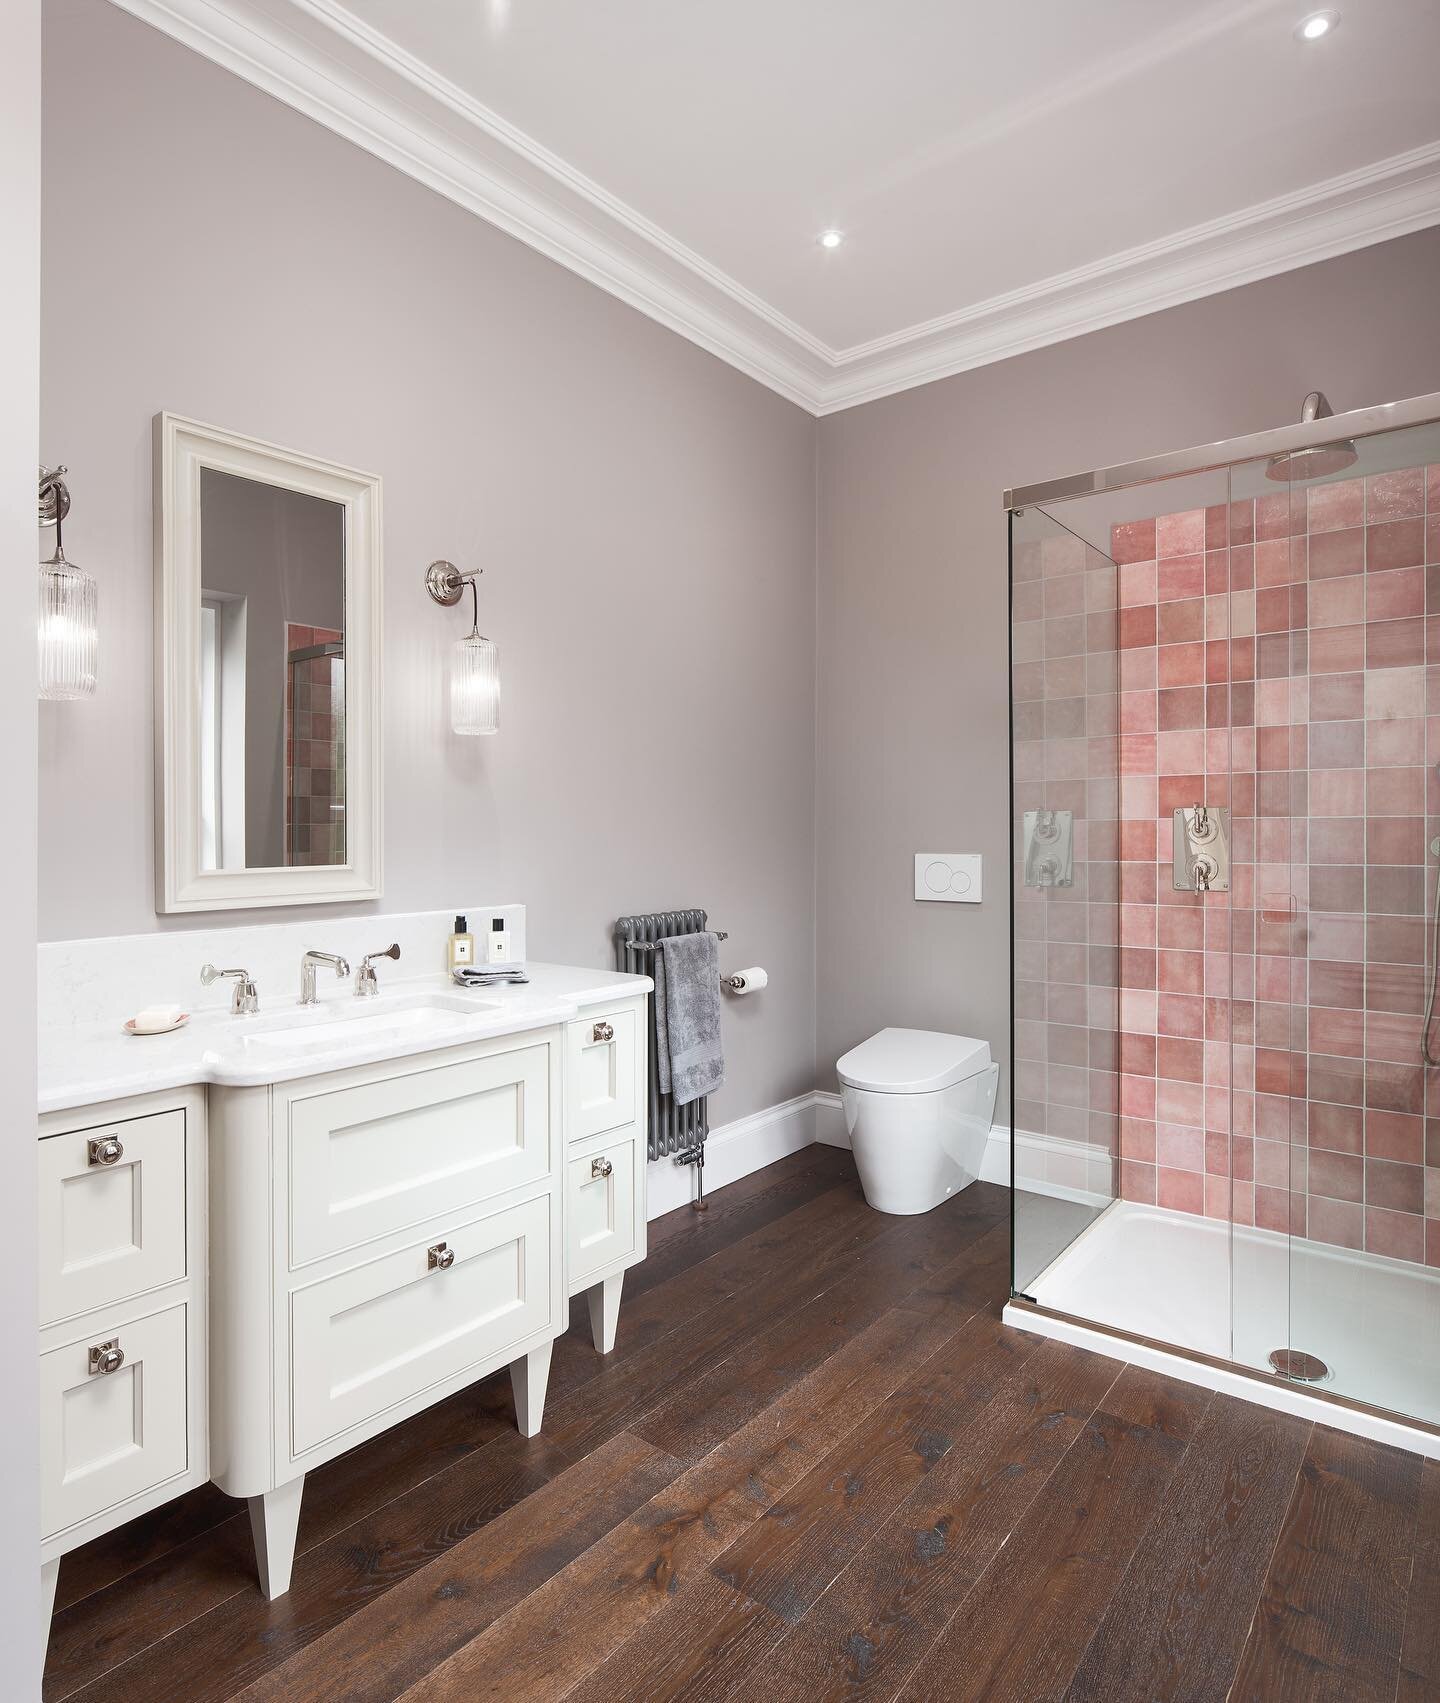 This Aberdeenshire shower room is beautifully unique, from the pale rose shower tiles, to the bespoke vanity unit and custom-selected marble top. Mixing carefully crafted cabinetry with handmade brassware from @drummonds_bathrooms ensures this shower